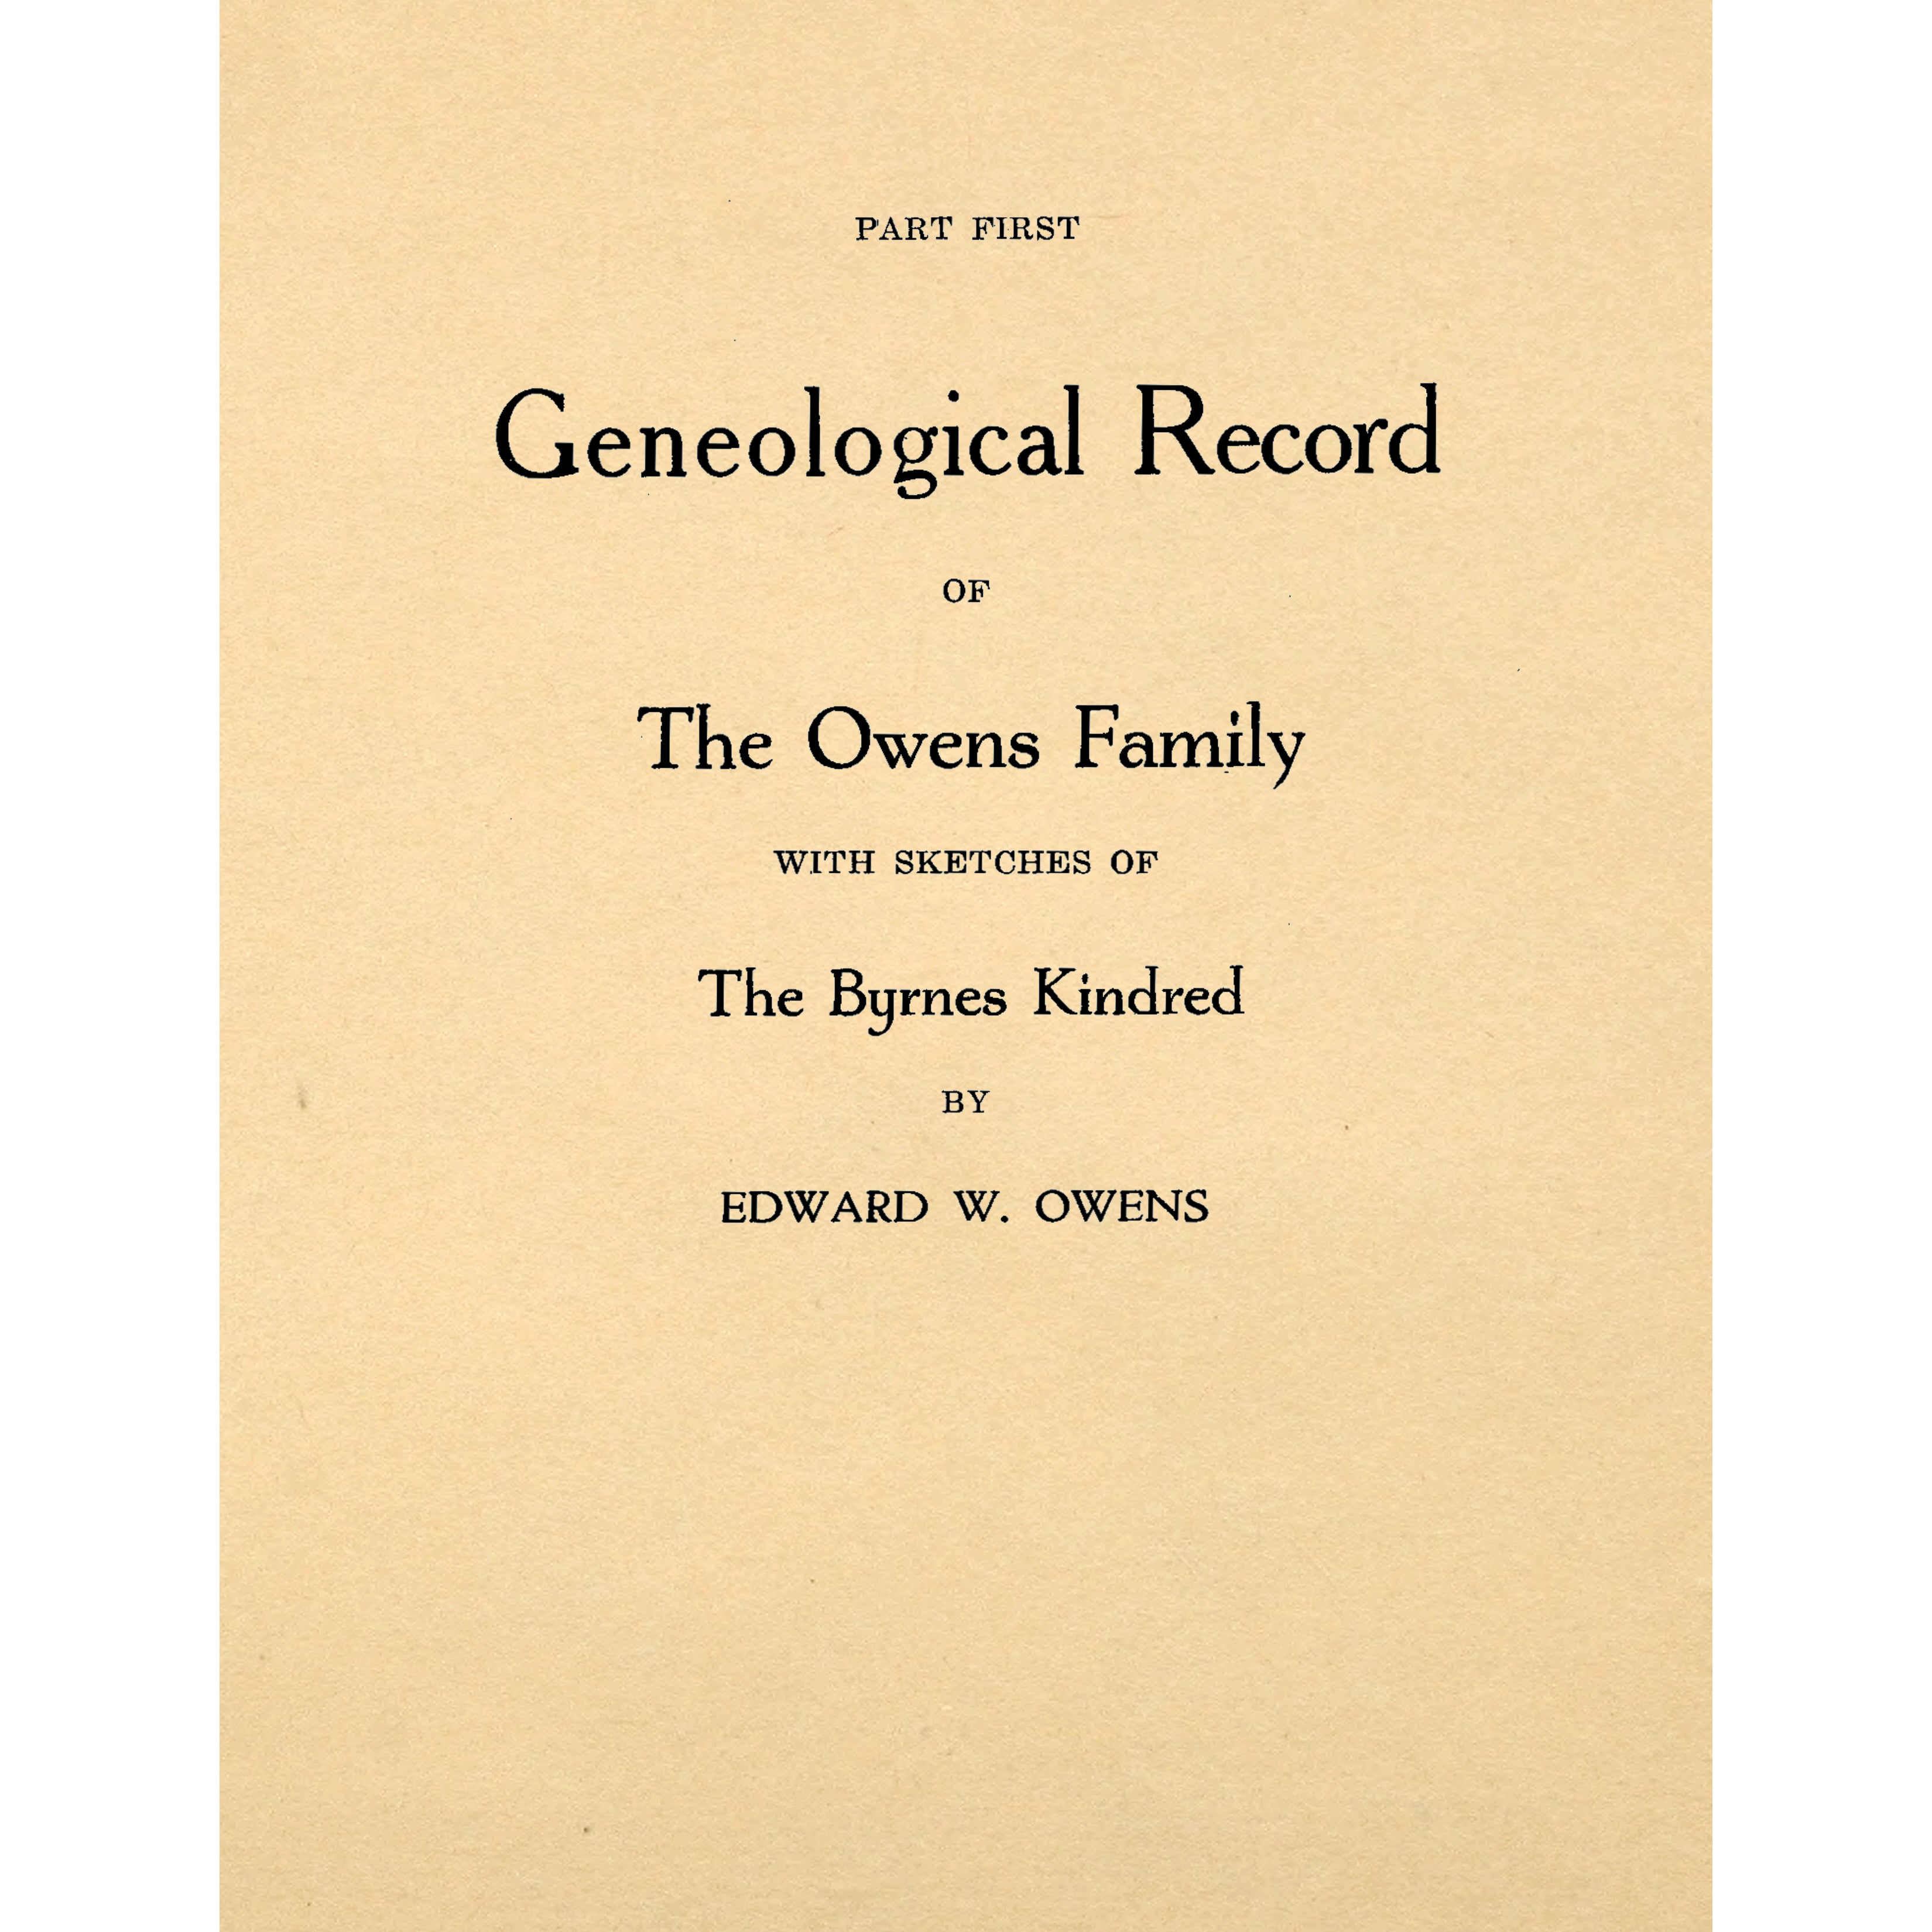 Genealogical record of the Owens Family with Sketches of the Byrnes Kindred